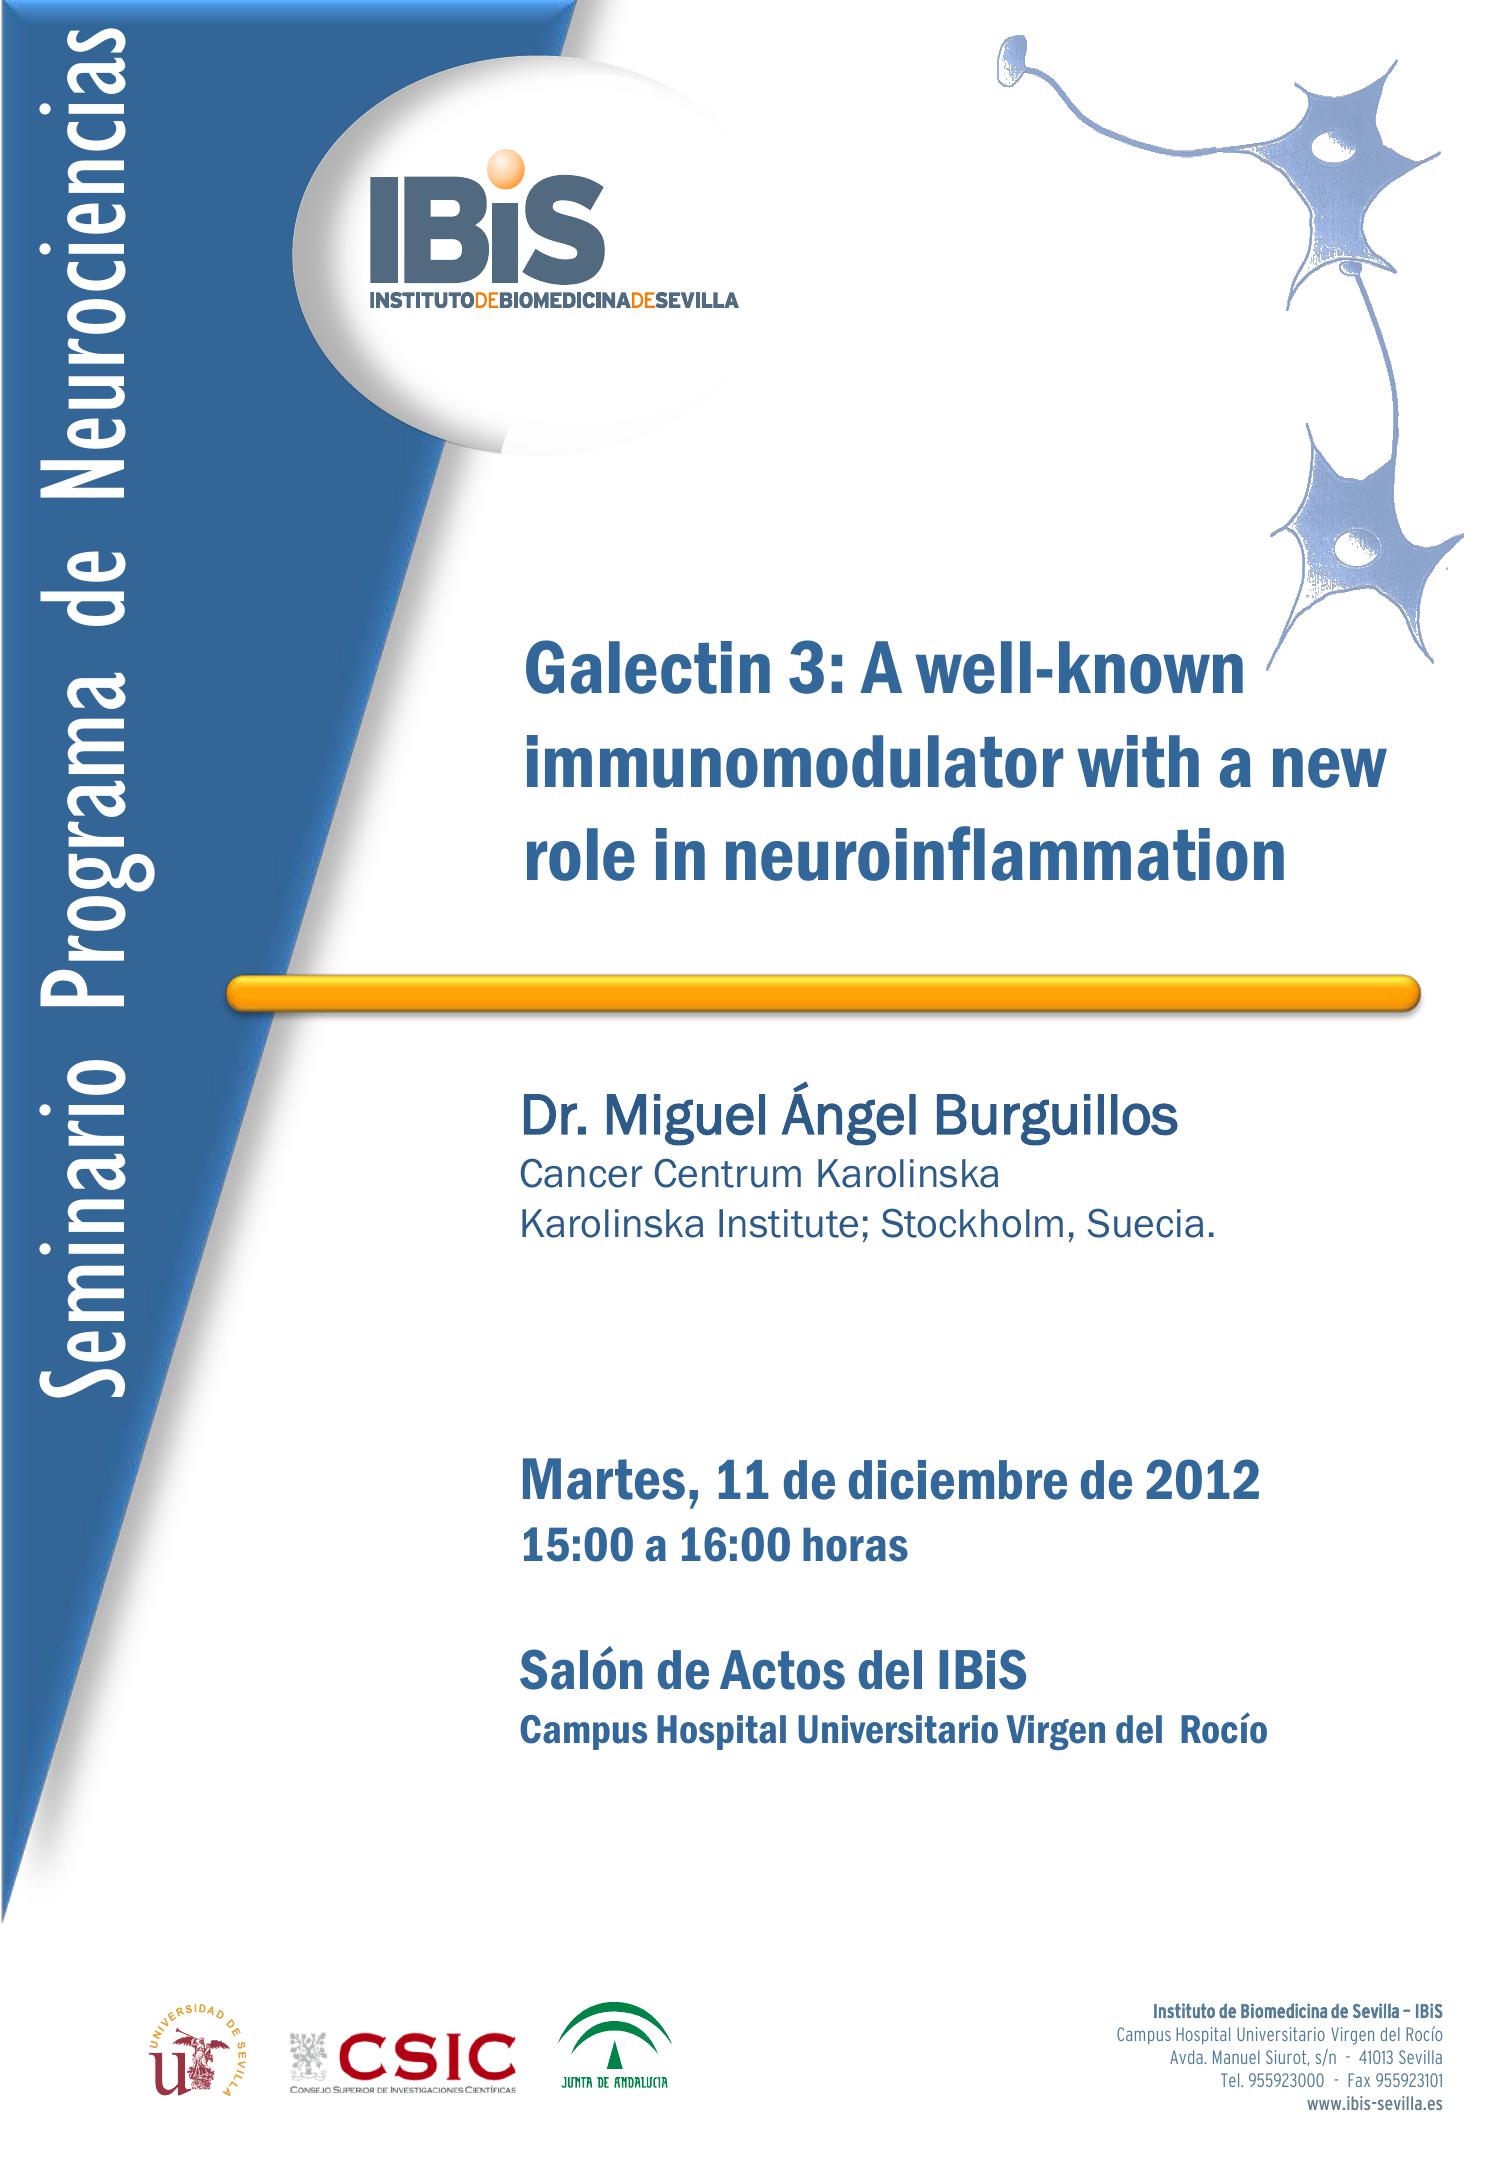 Poster: Galectin 3: A well-known immunomodulator with a new role in neuroinflammation.